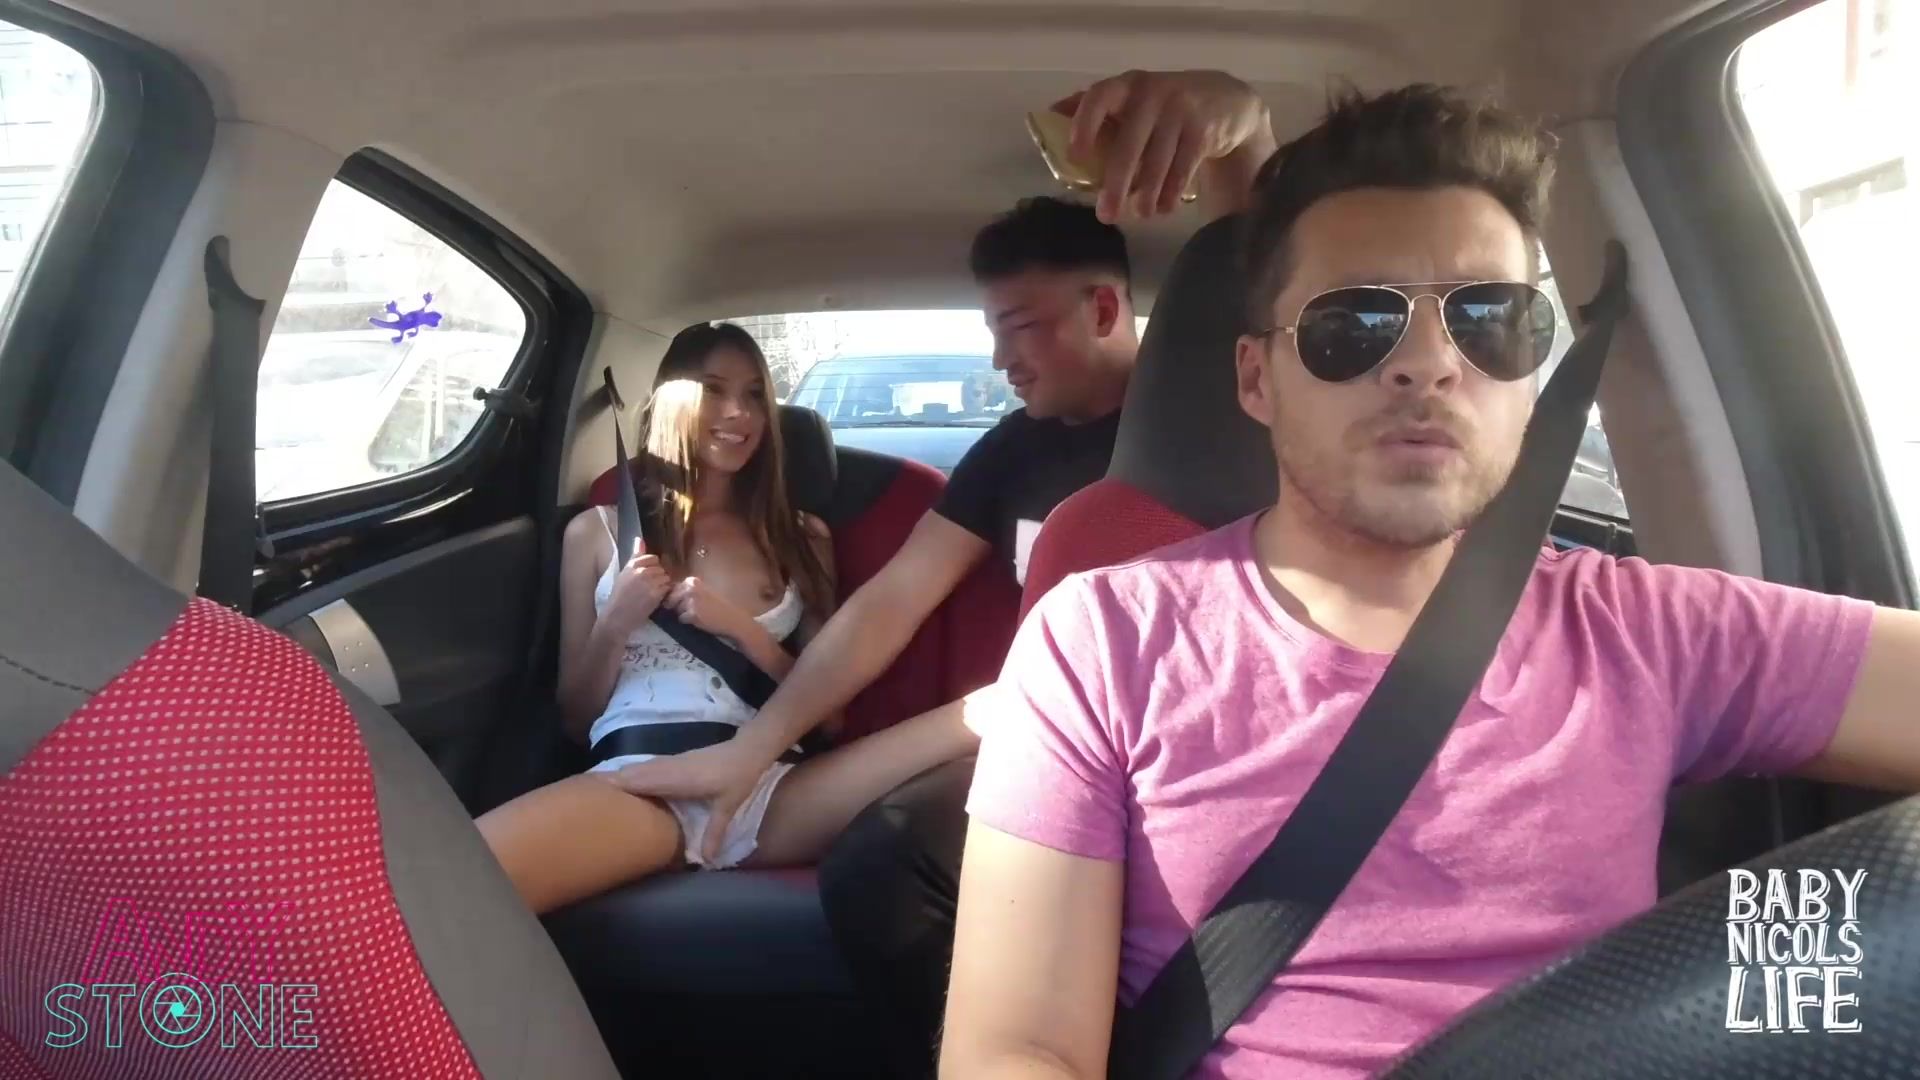 Free HD SEX ON UBER, BLOWJOB IN THE BACK SEAT! PUBLIC FUCKING! Porn Video